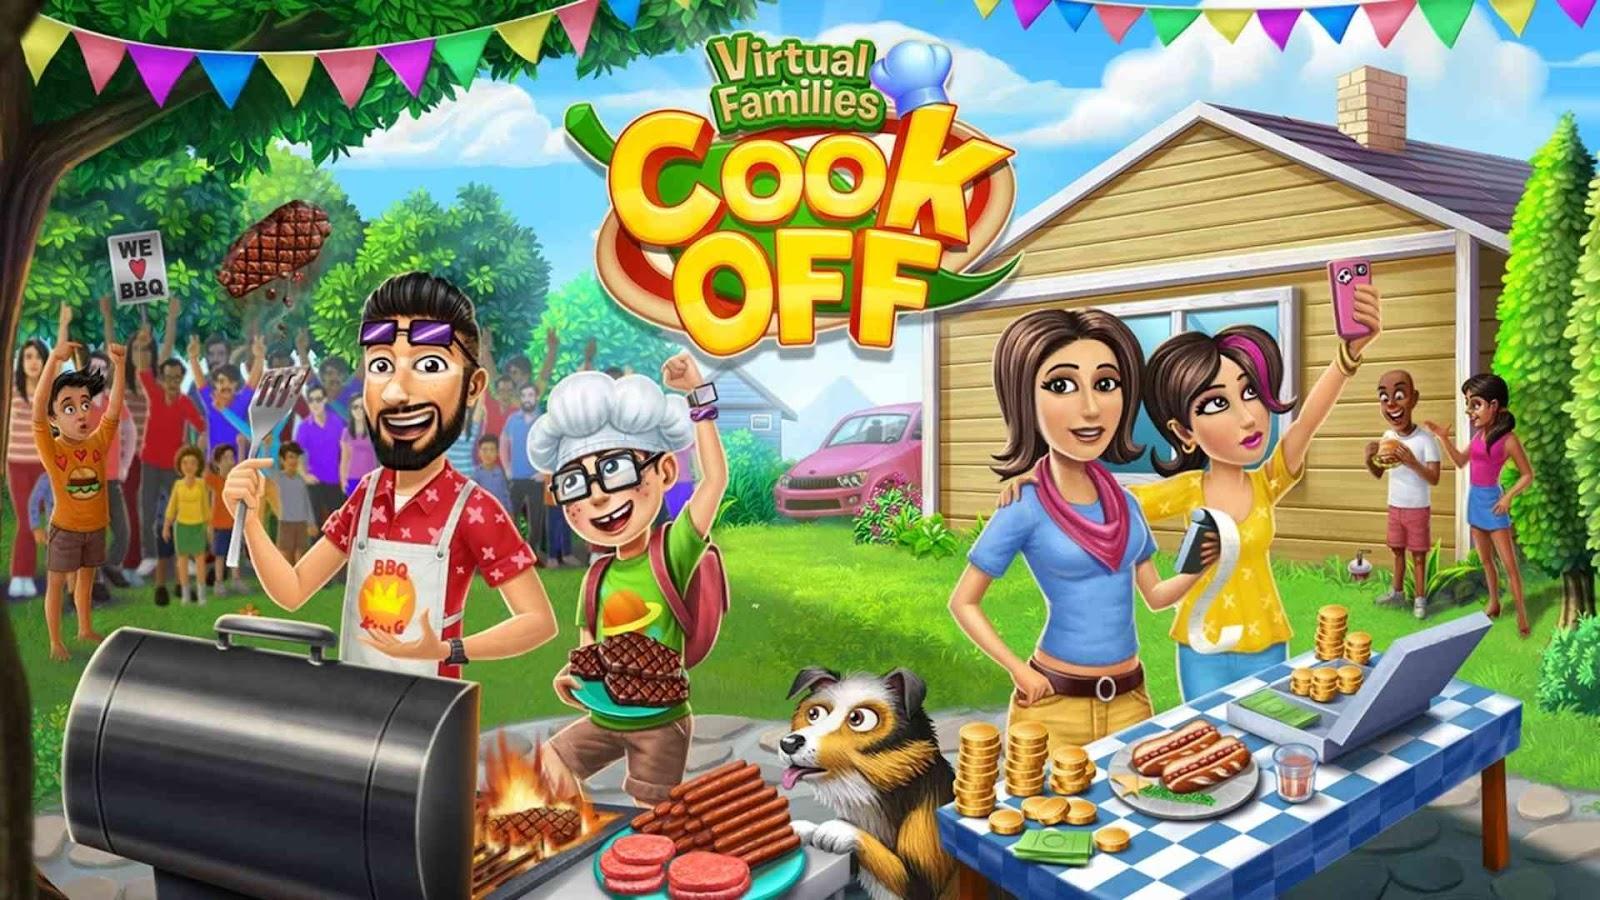  Virtual Families Cook-Off